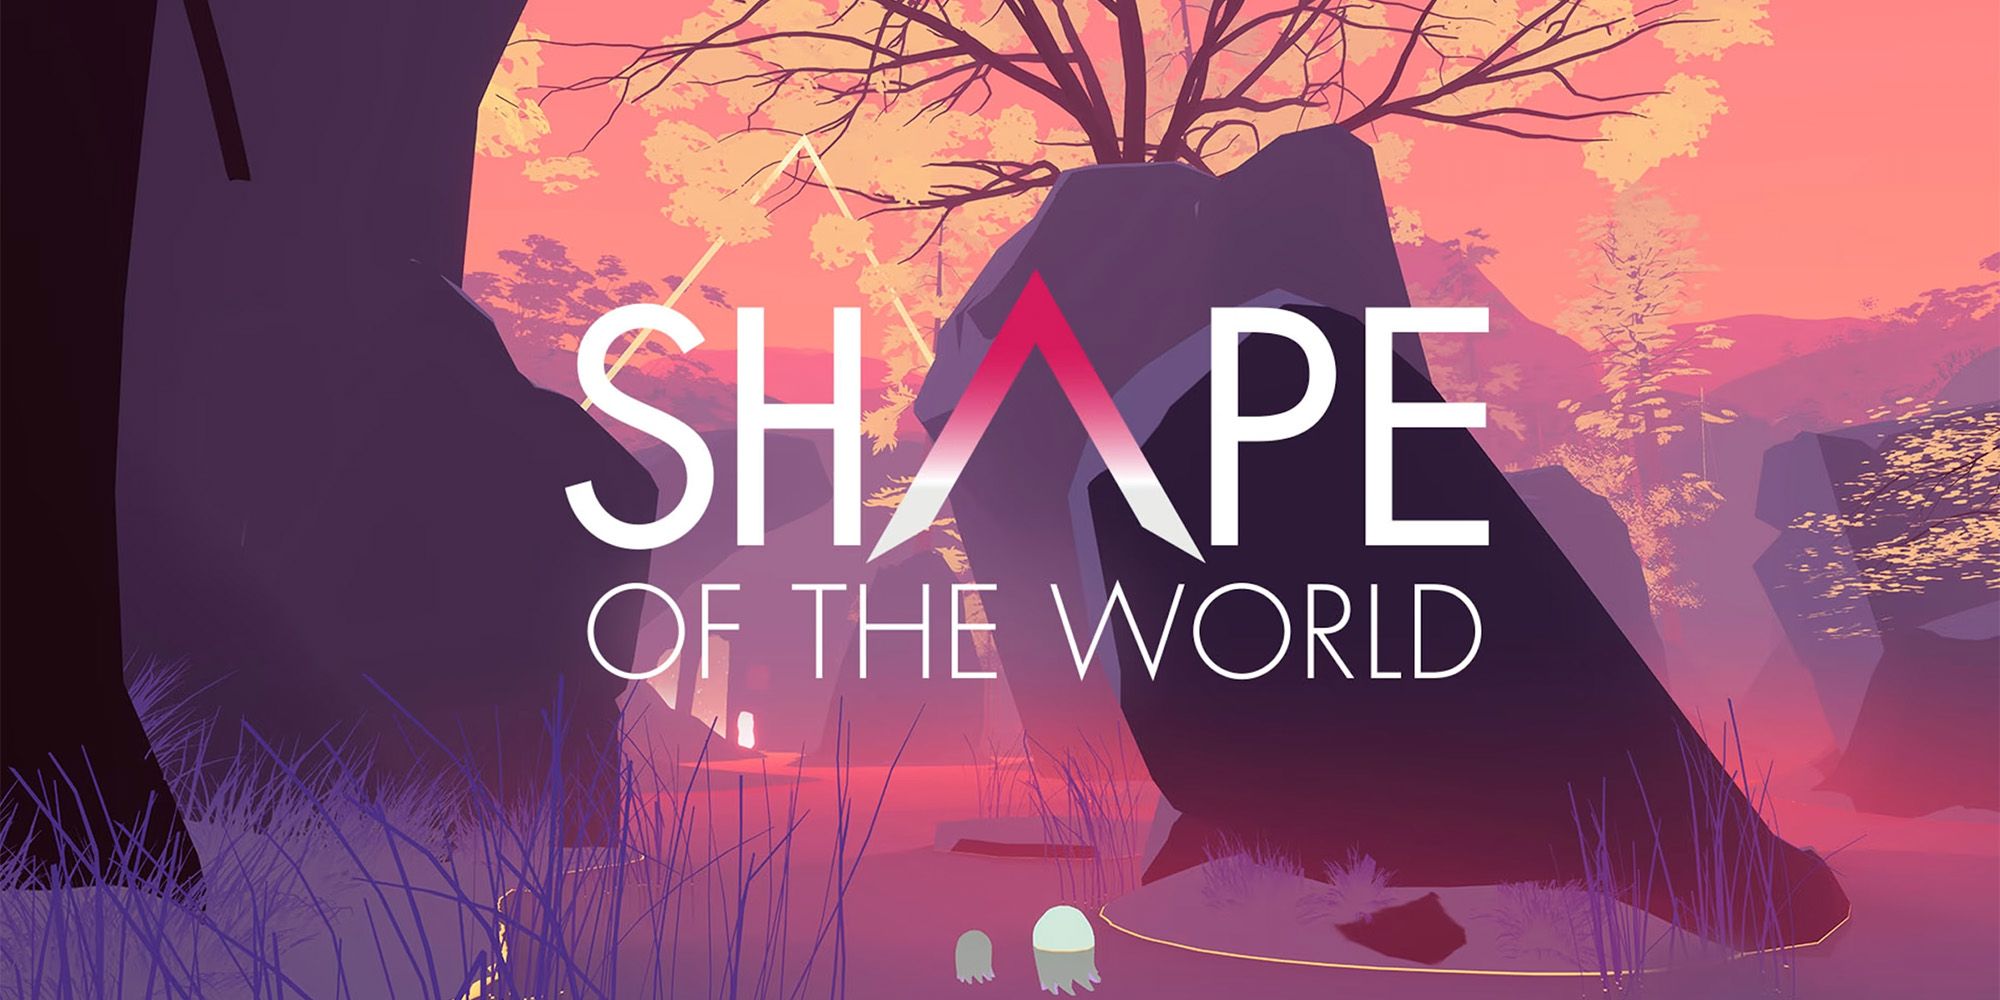 Shape Of The World - A Serene Landscape With Trees, Grass, And An Orange Sky